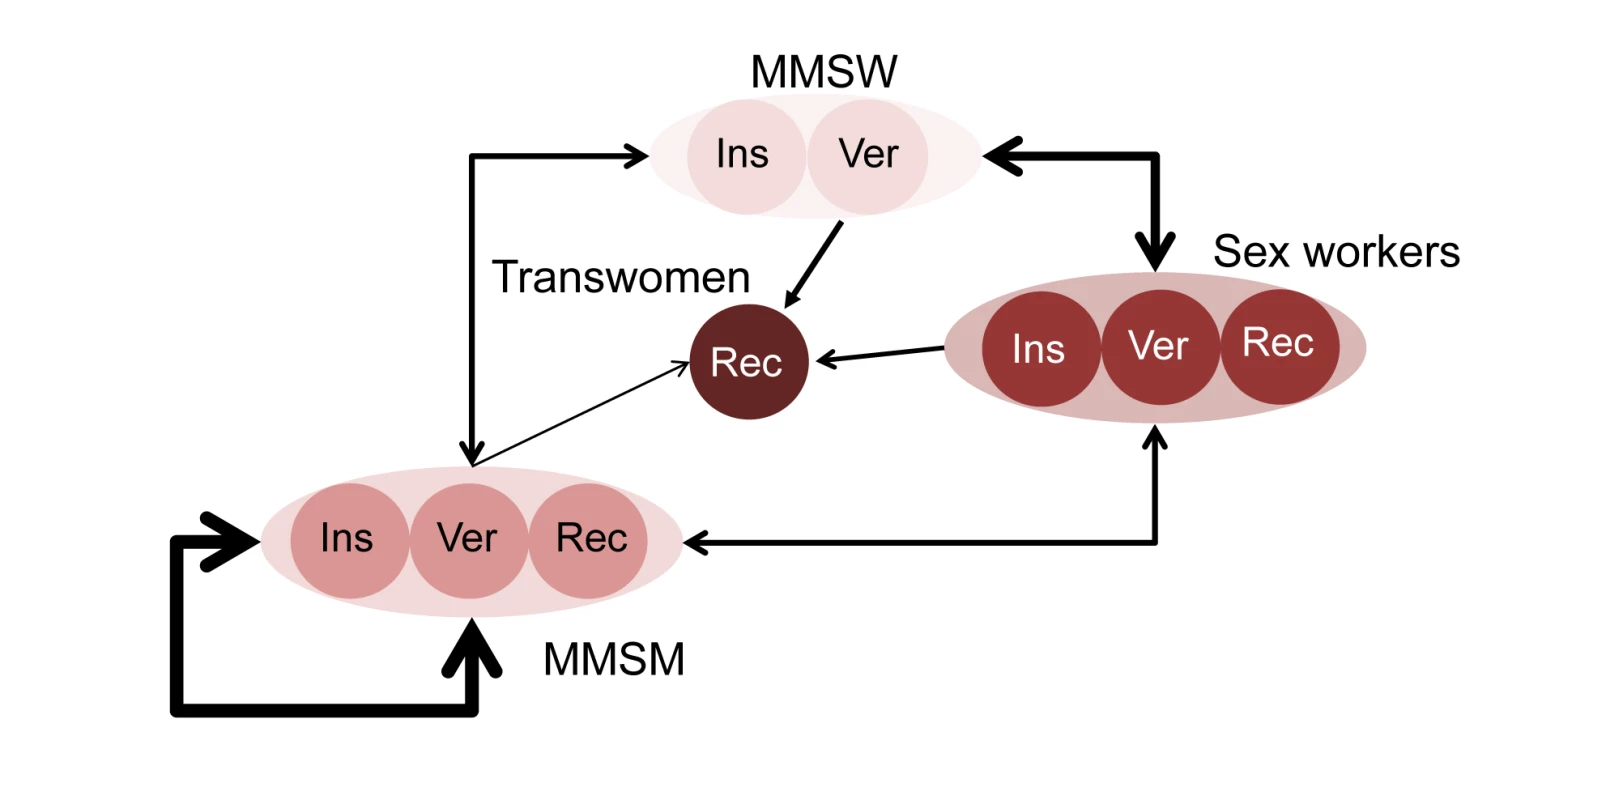 Model representation of sexual mixing and sexual positioning among MSM and transwomen.